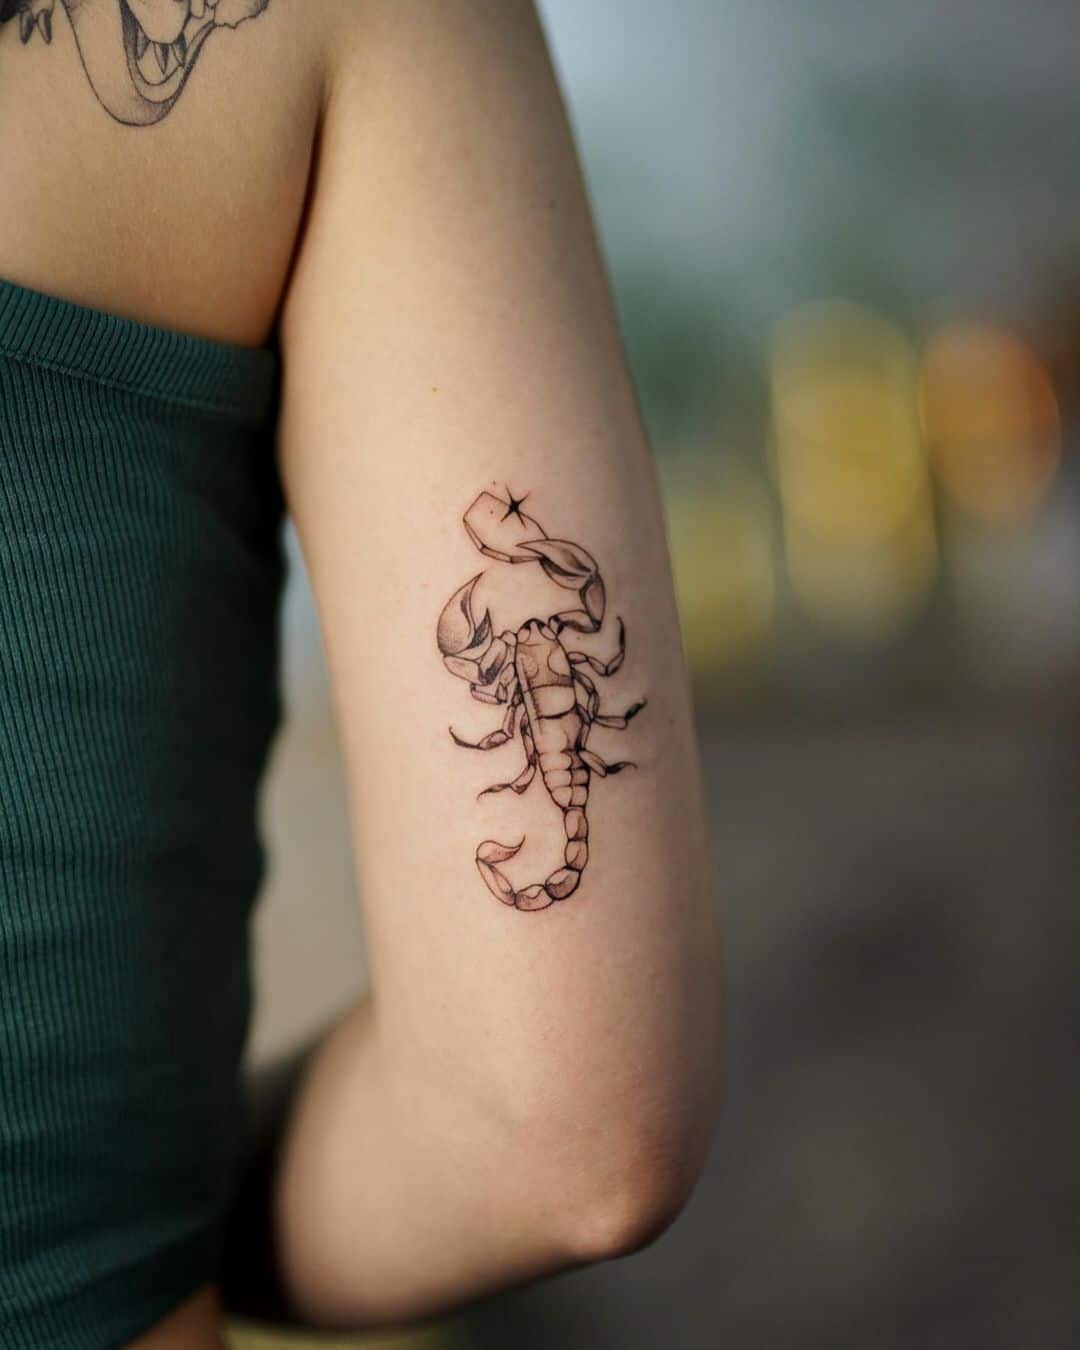 Micro-realistic scorpion and flower tattoo located on